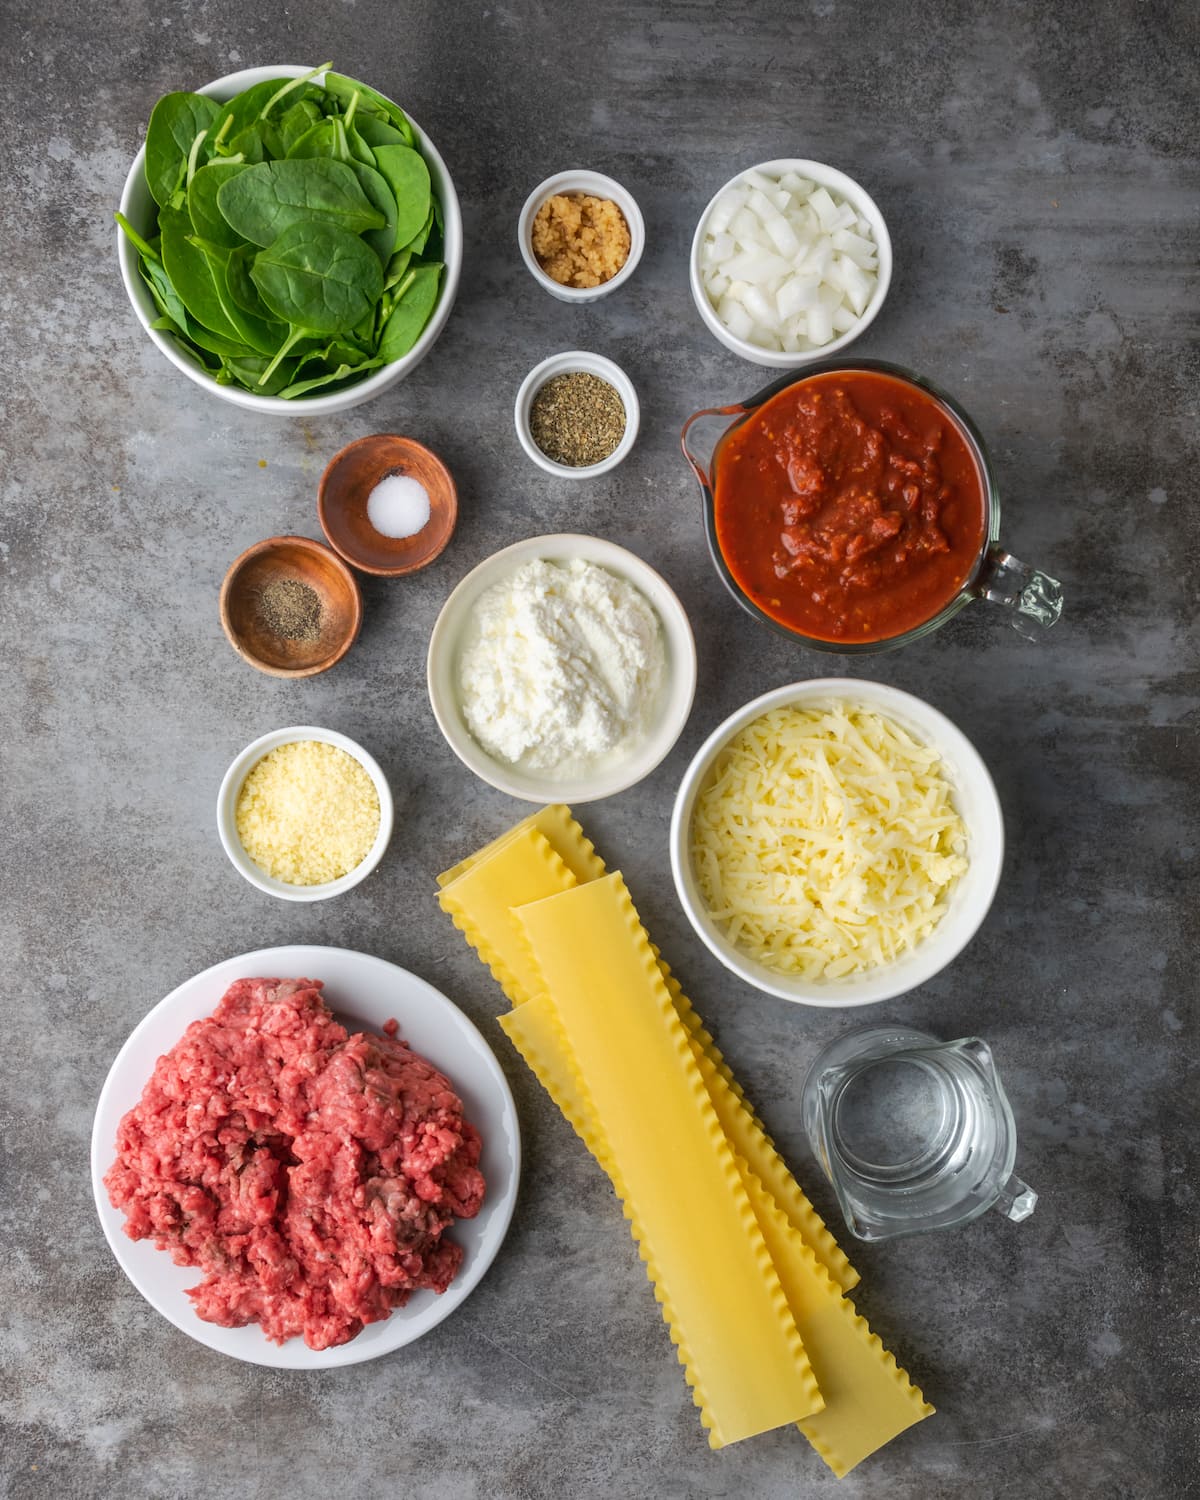 The ingredients for easy Instant Pot lasagna.